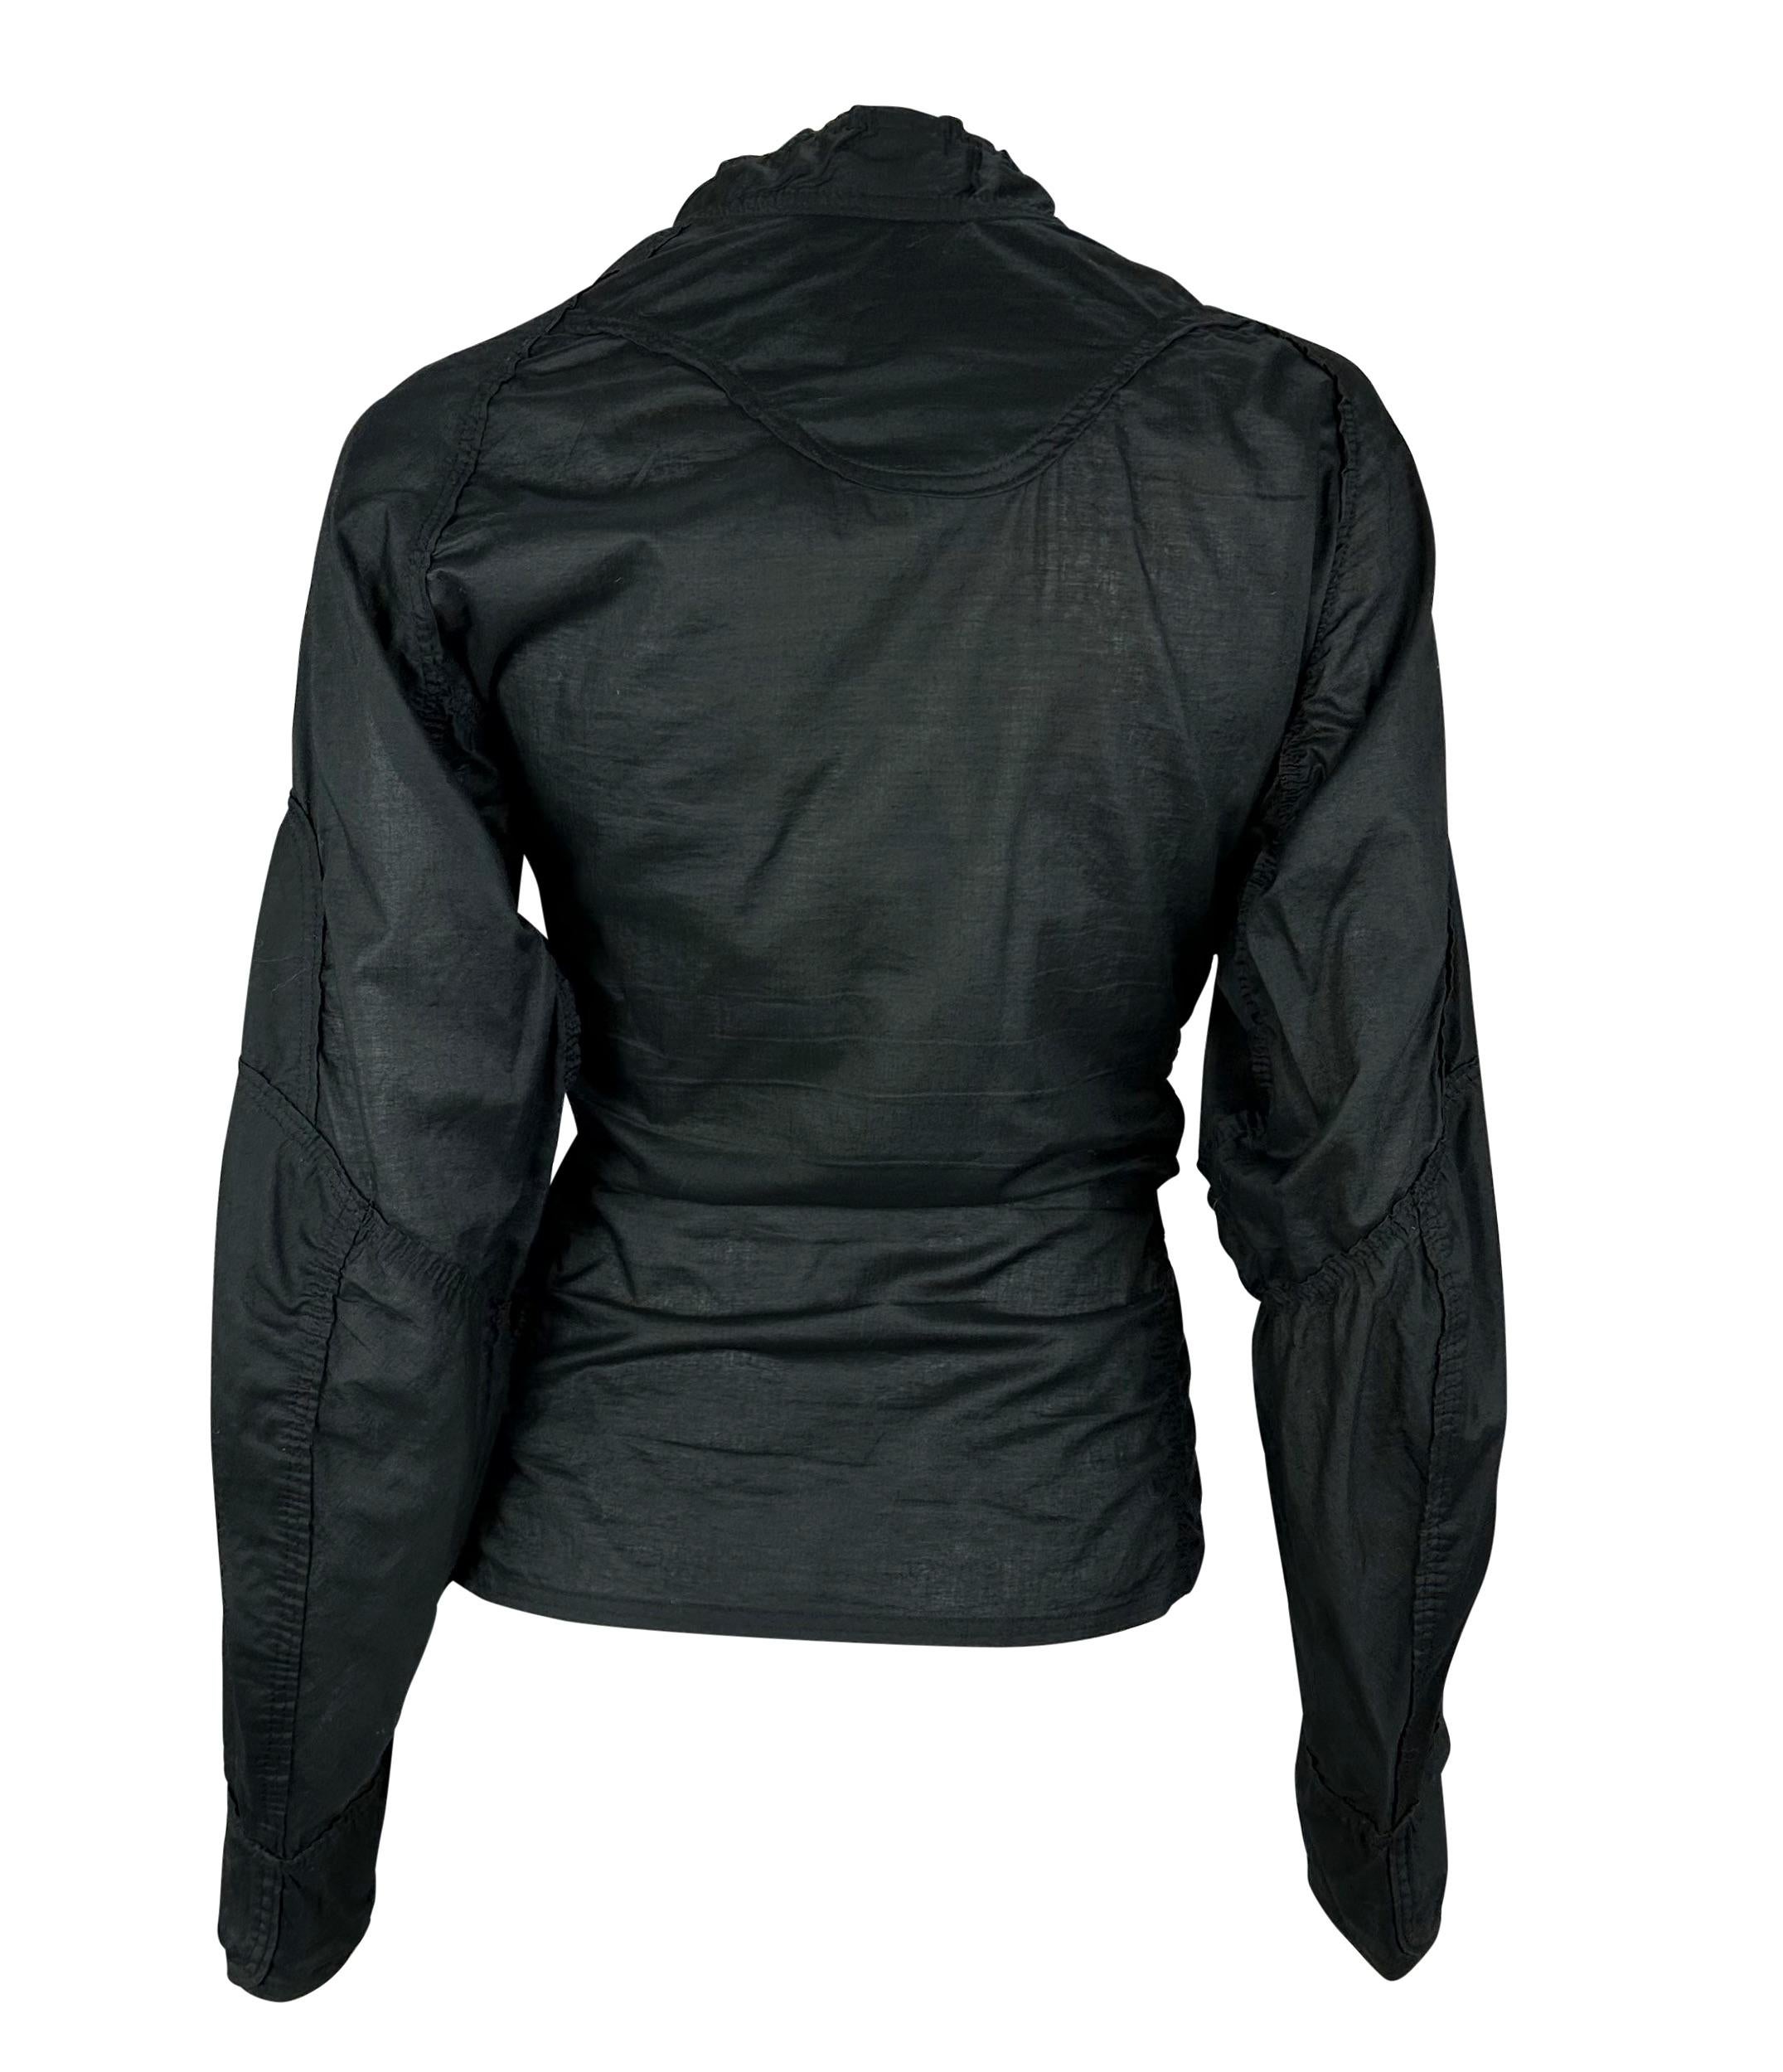 S/S 2002 Yves Saint Laurent by Tom Ford Safari Black Ruched Pussy Bow Zip Top For Sale 2